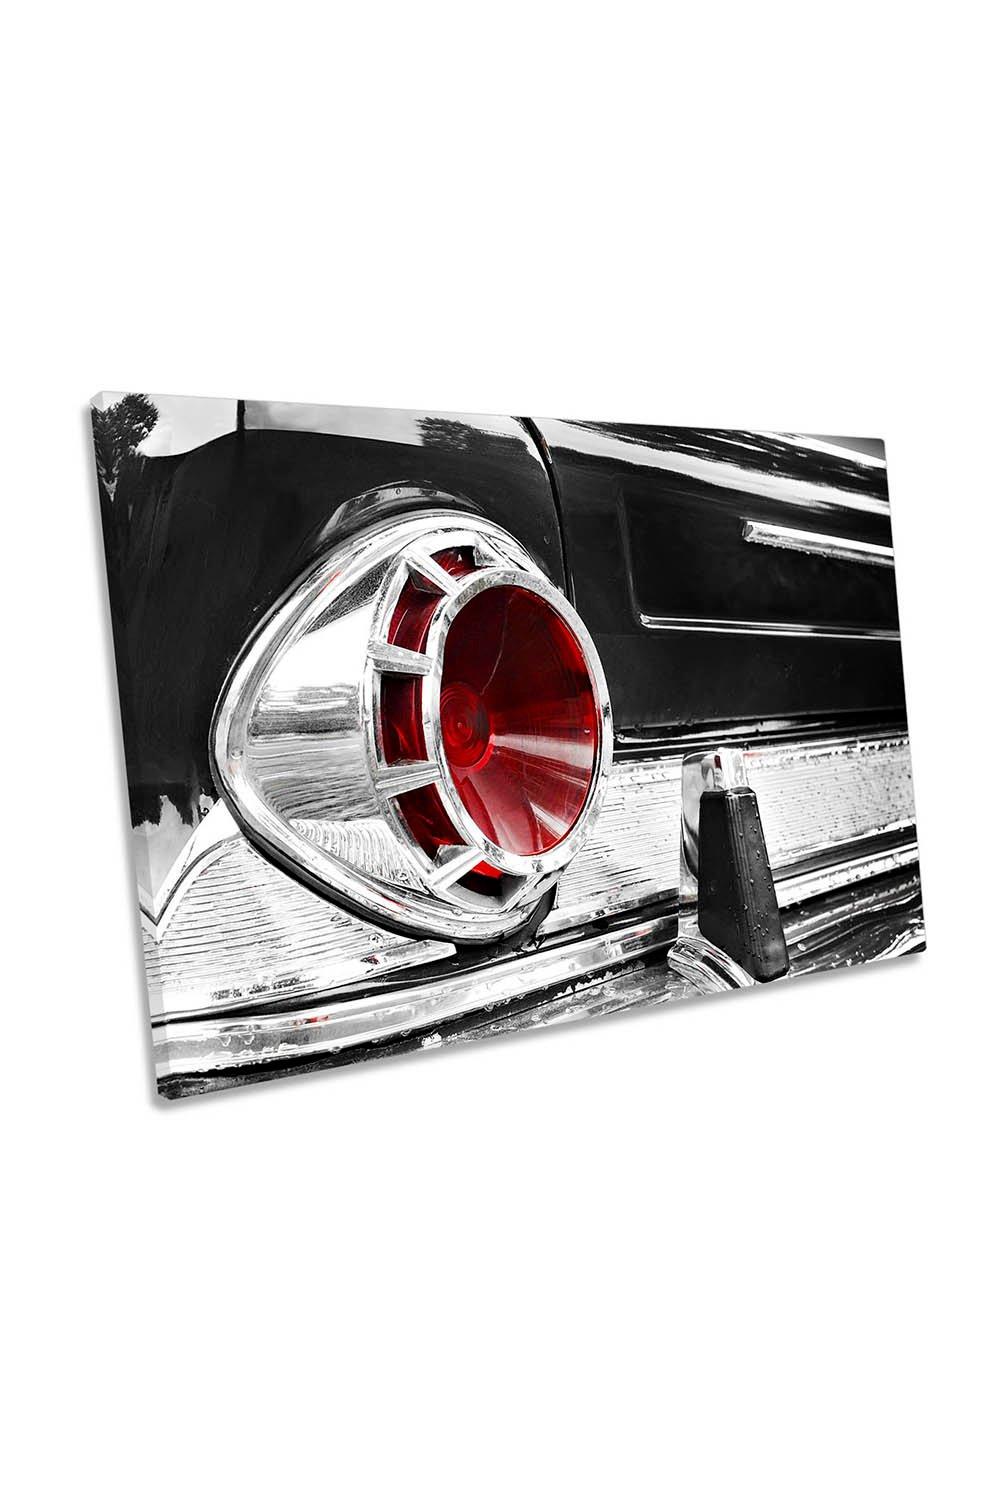 US Classic Car 1963 New Yorker Rear Canvas Wall Art Picture Print